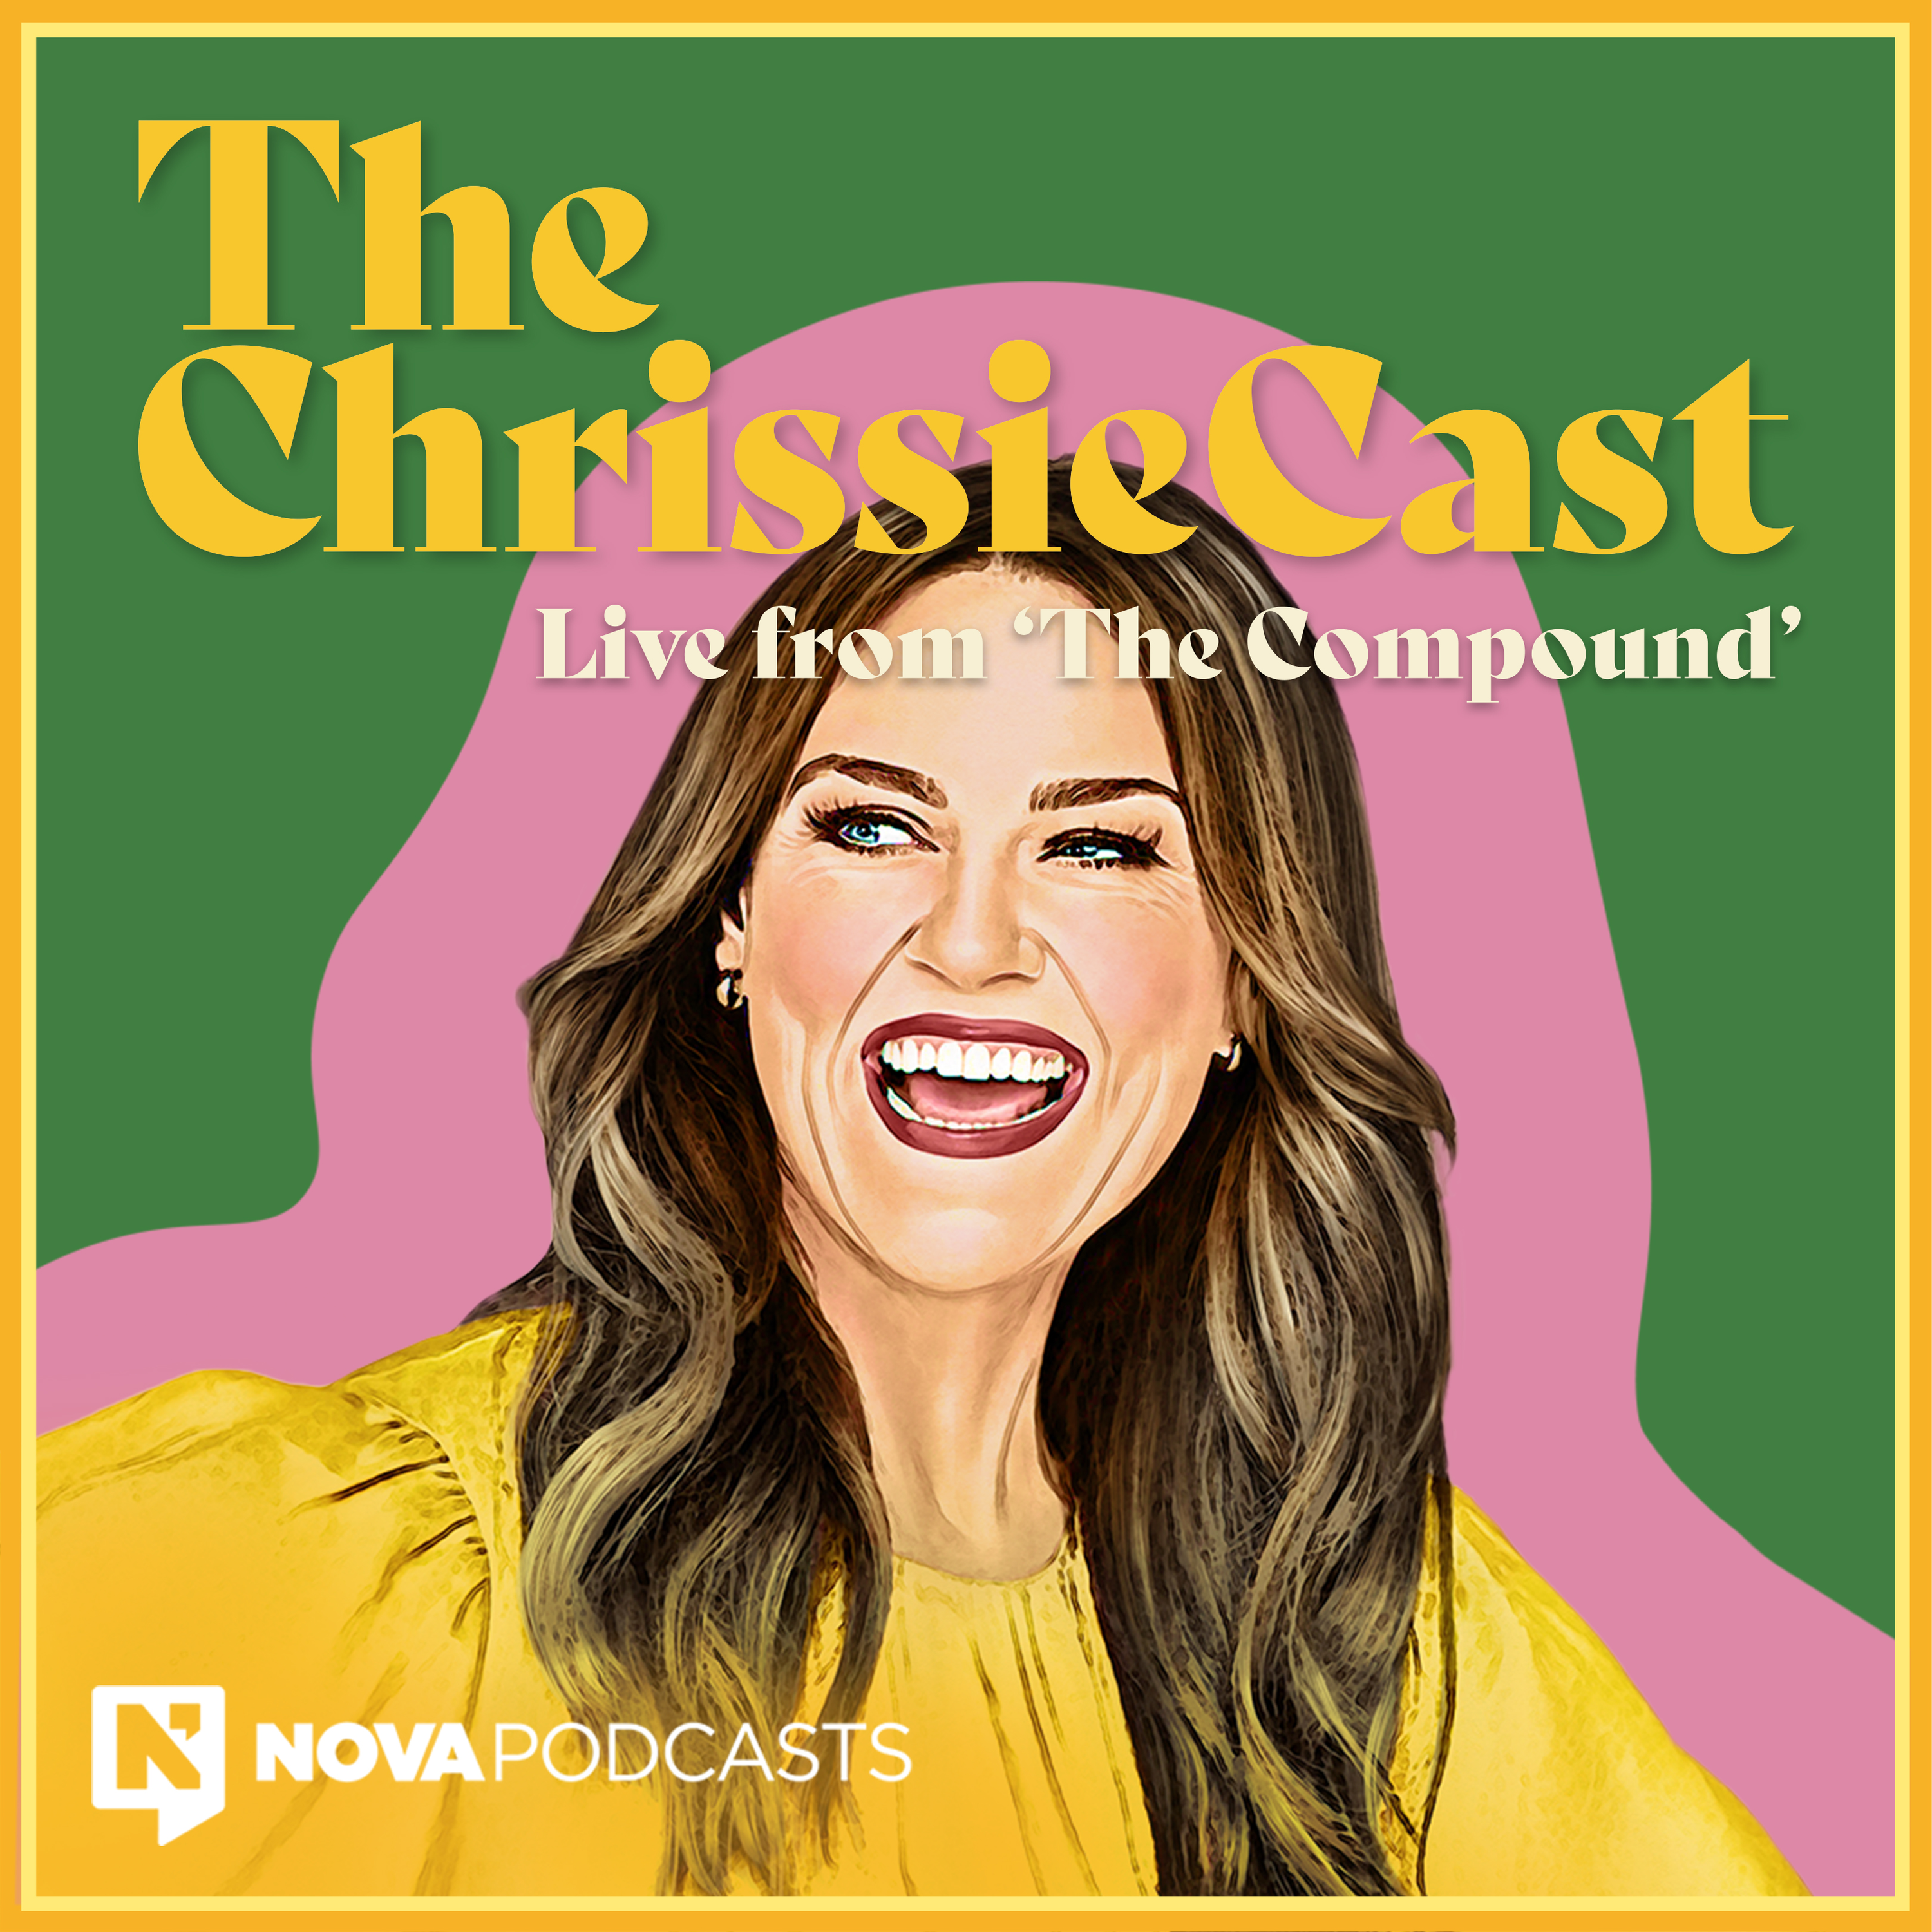 The ChrissieCast: Septuple Threat, Tim Minchin, Talks All Things The Word ‘Moist’, Chrissie Cries And An Impromptu Rendition Of Tenterfield Saddler